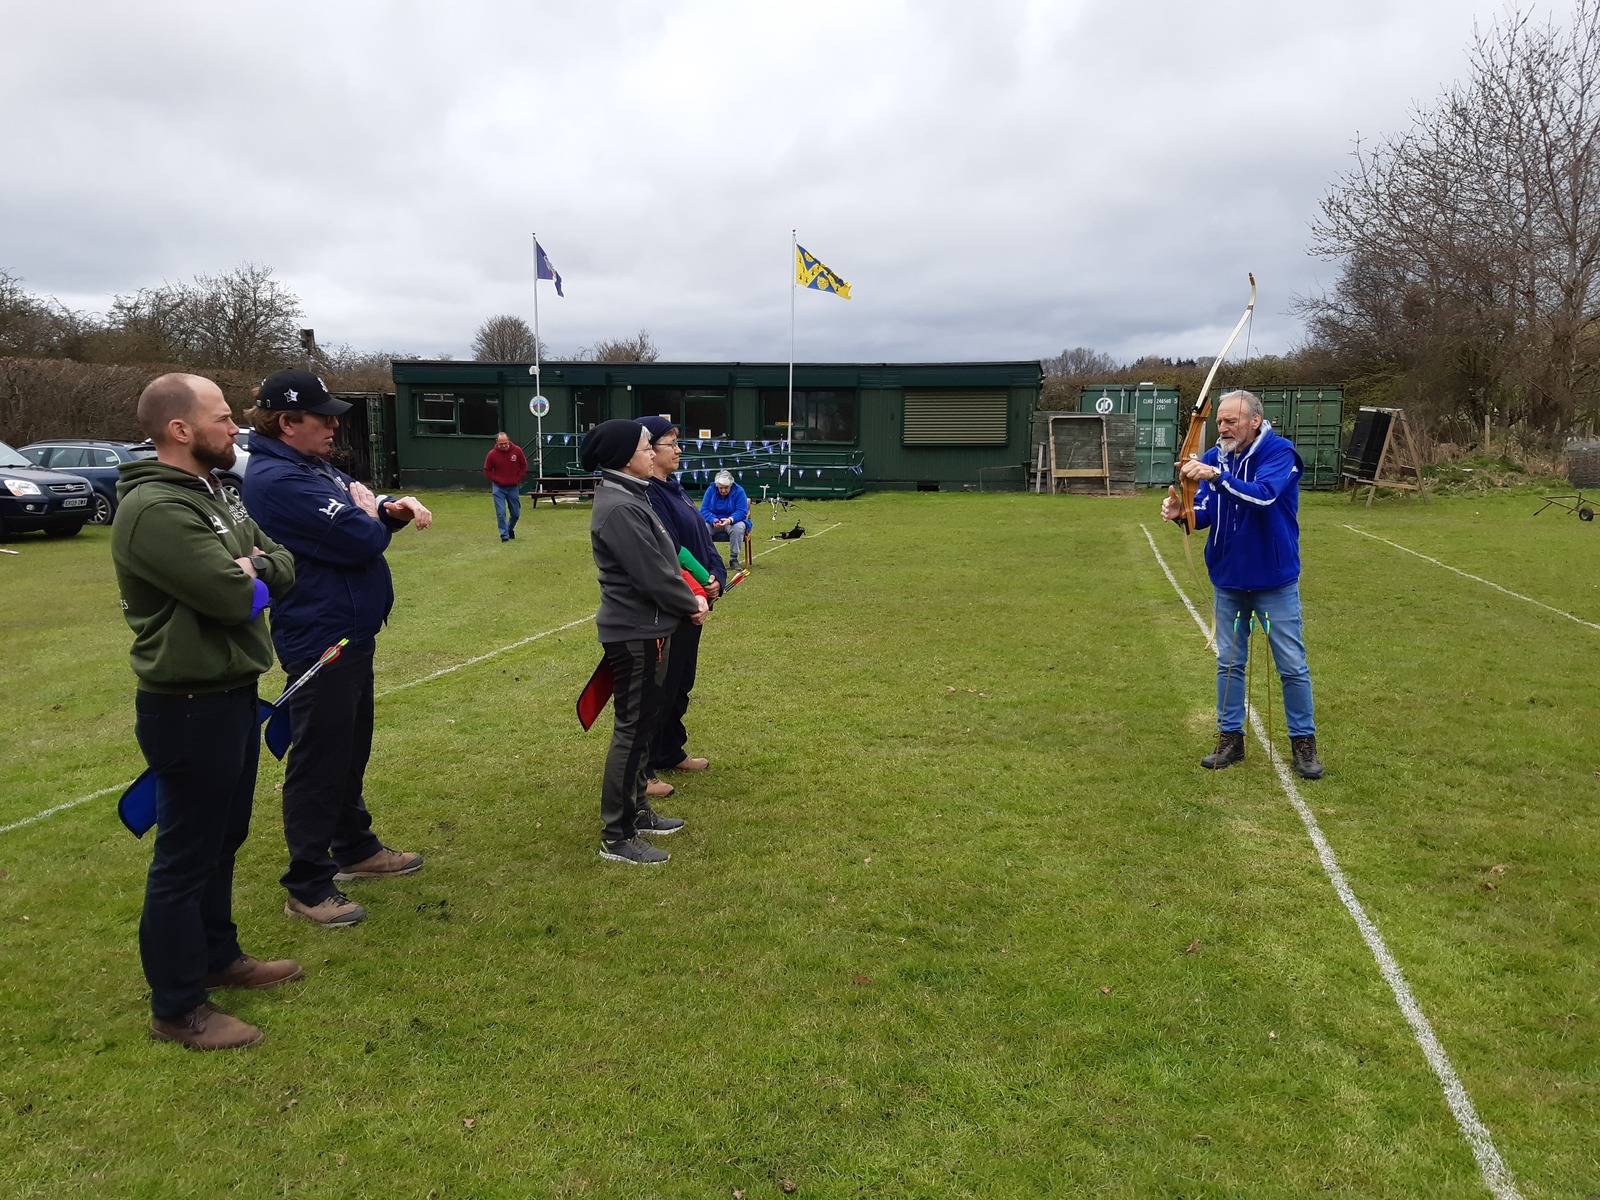 Coach and archers at a range 